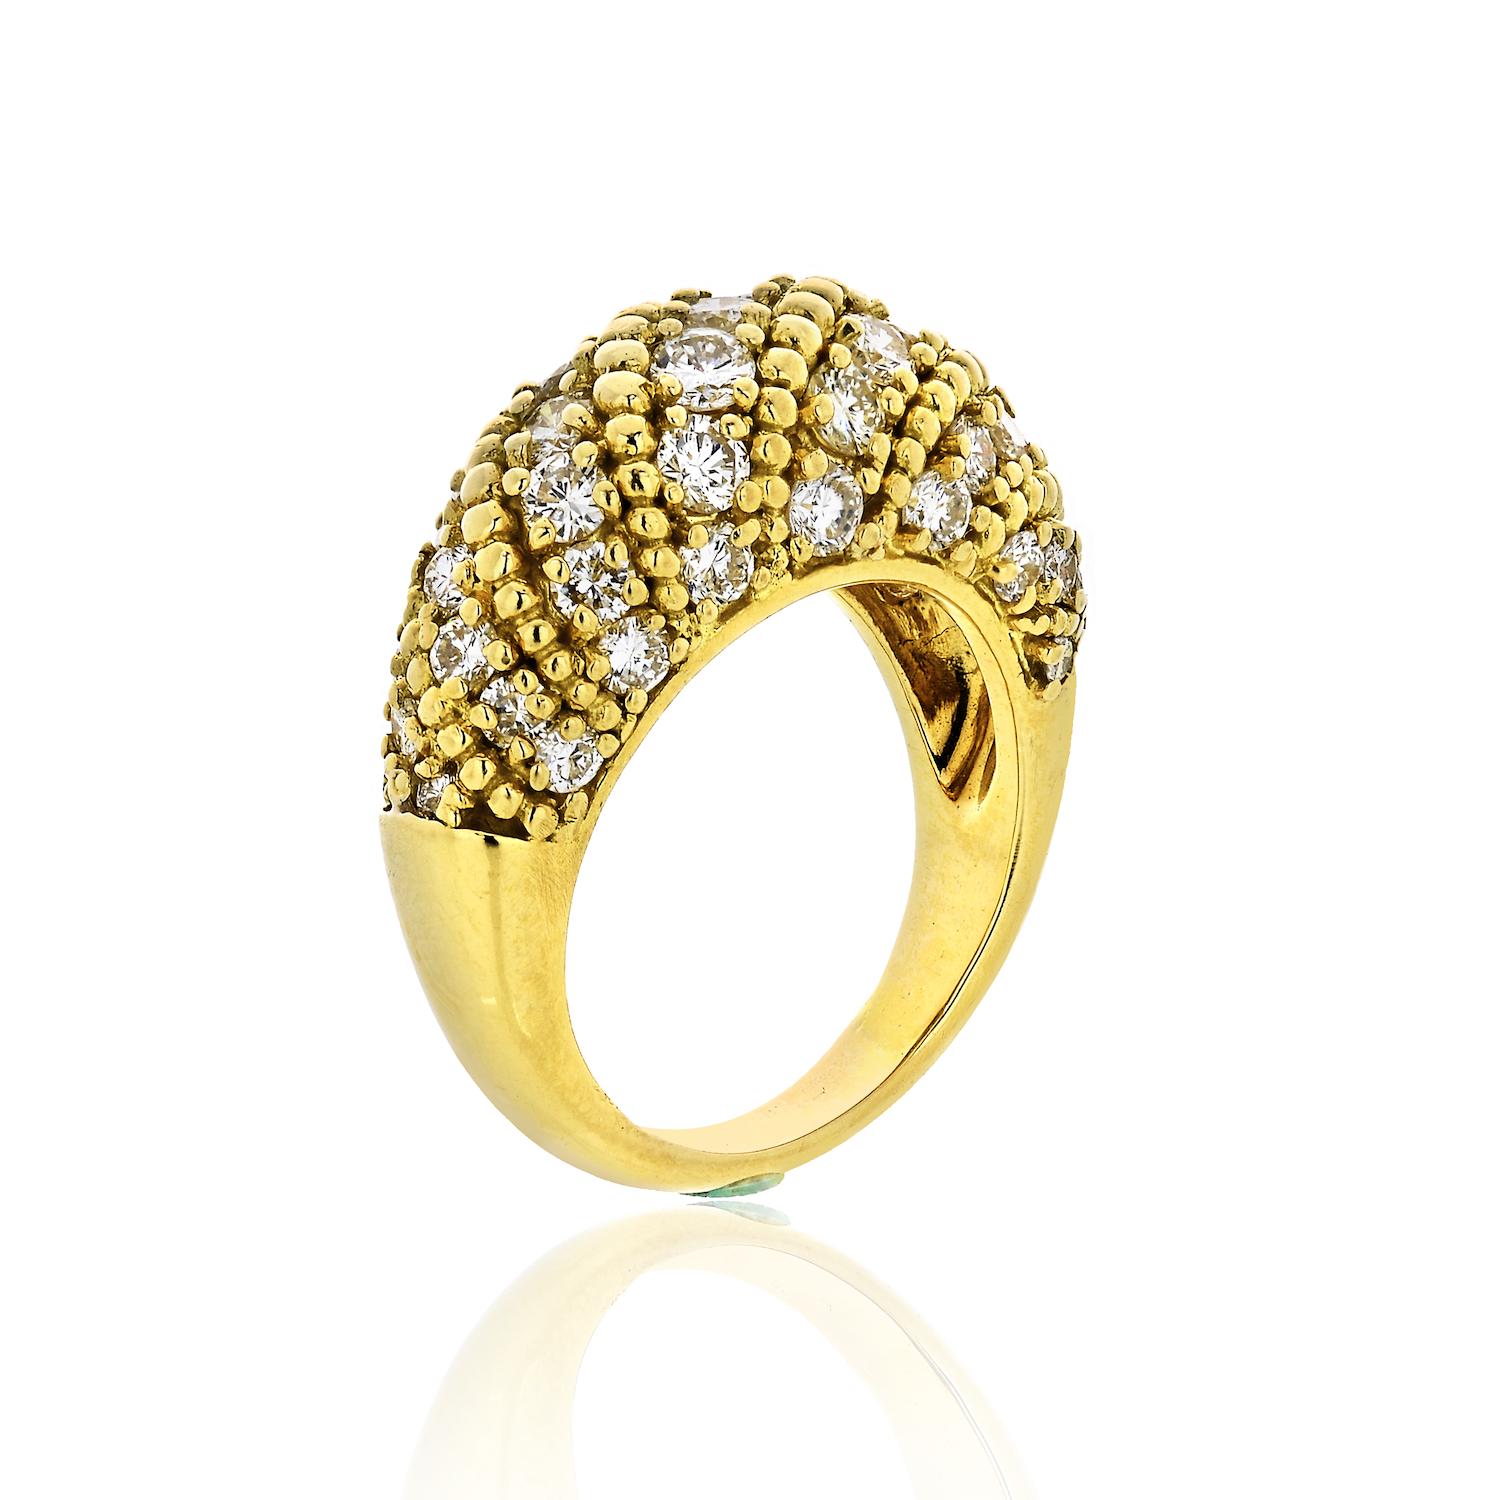 This vintage ring dates from the 1970s and was designed by iconic jewelers Van Cleef & Arpels. Crafted from 18-karat gold, it is encrusted with 2.50-carats of round-cut diamonds. 

Size 6